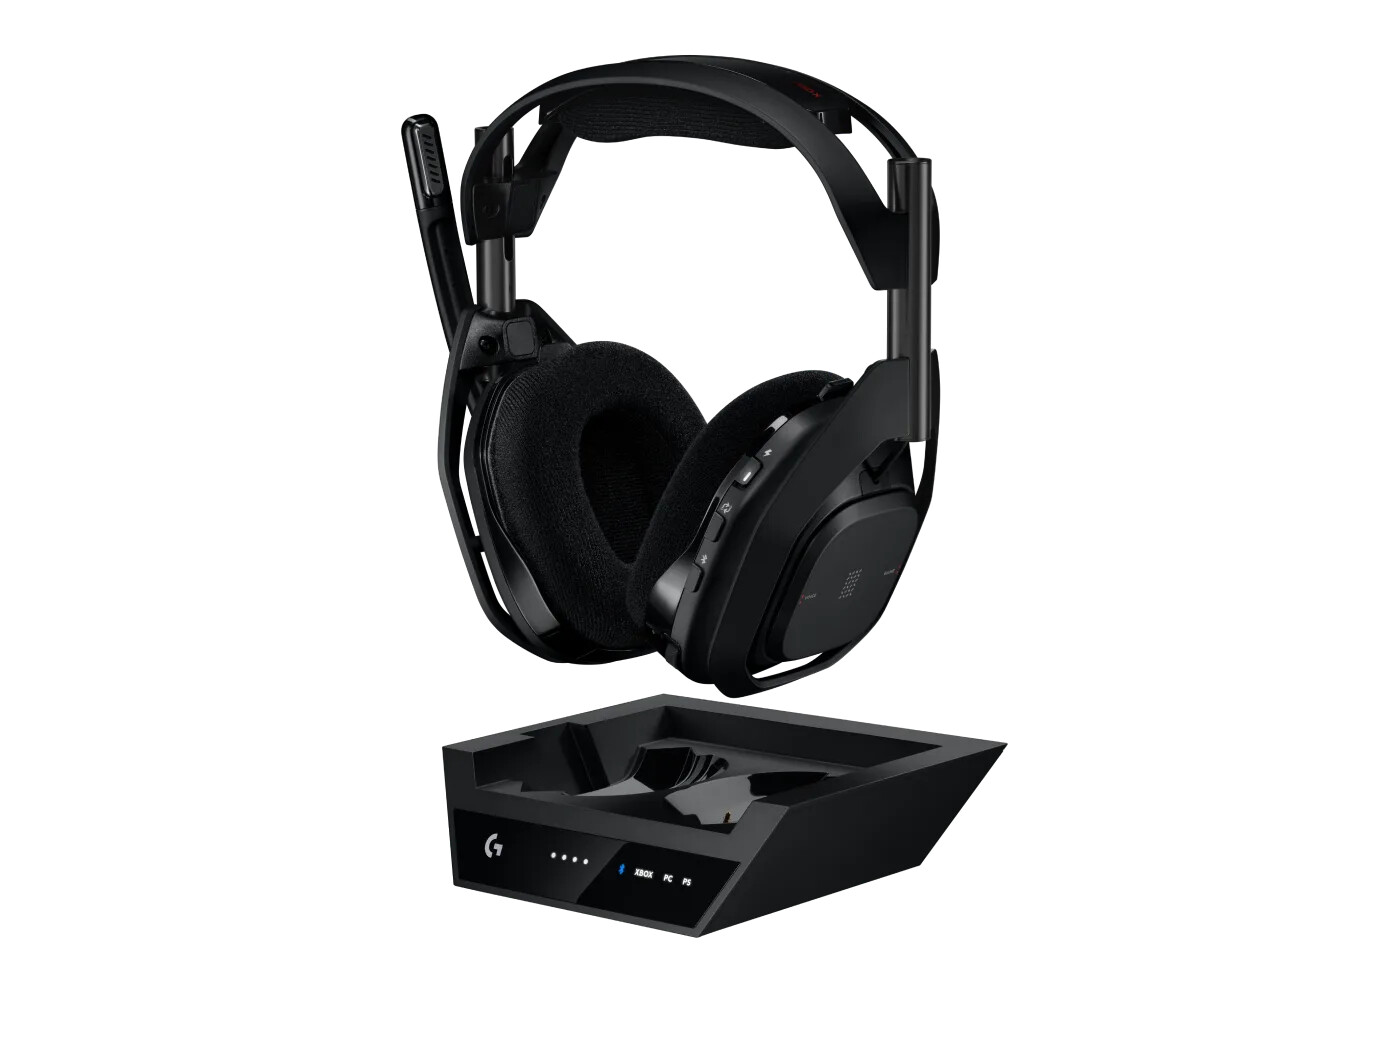 Logitech Astro A50 gaming headset review